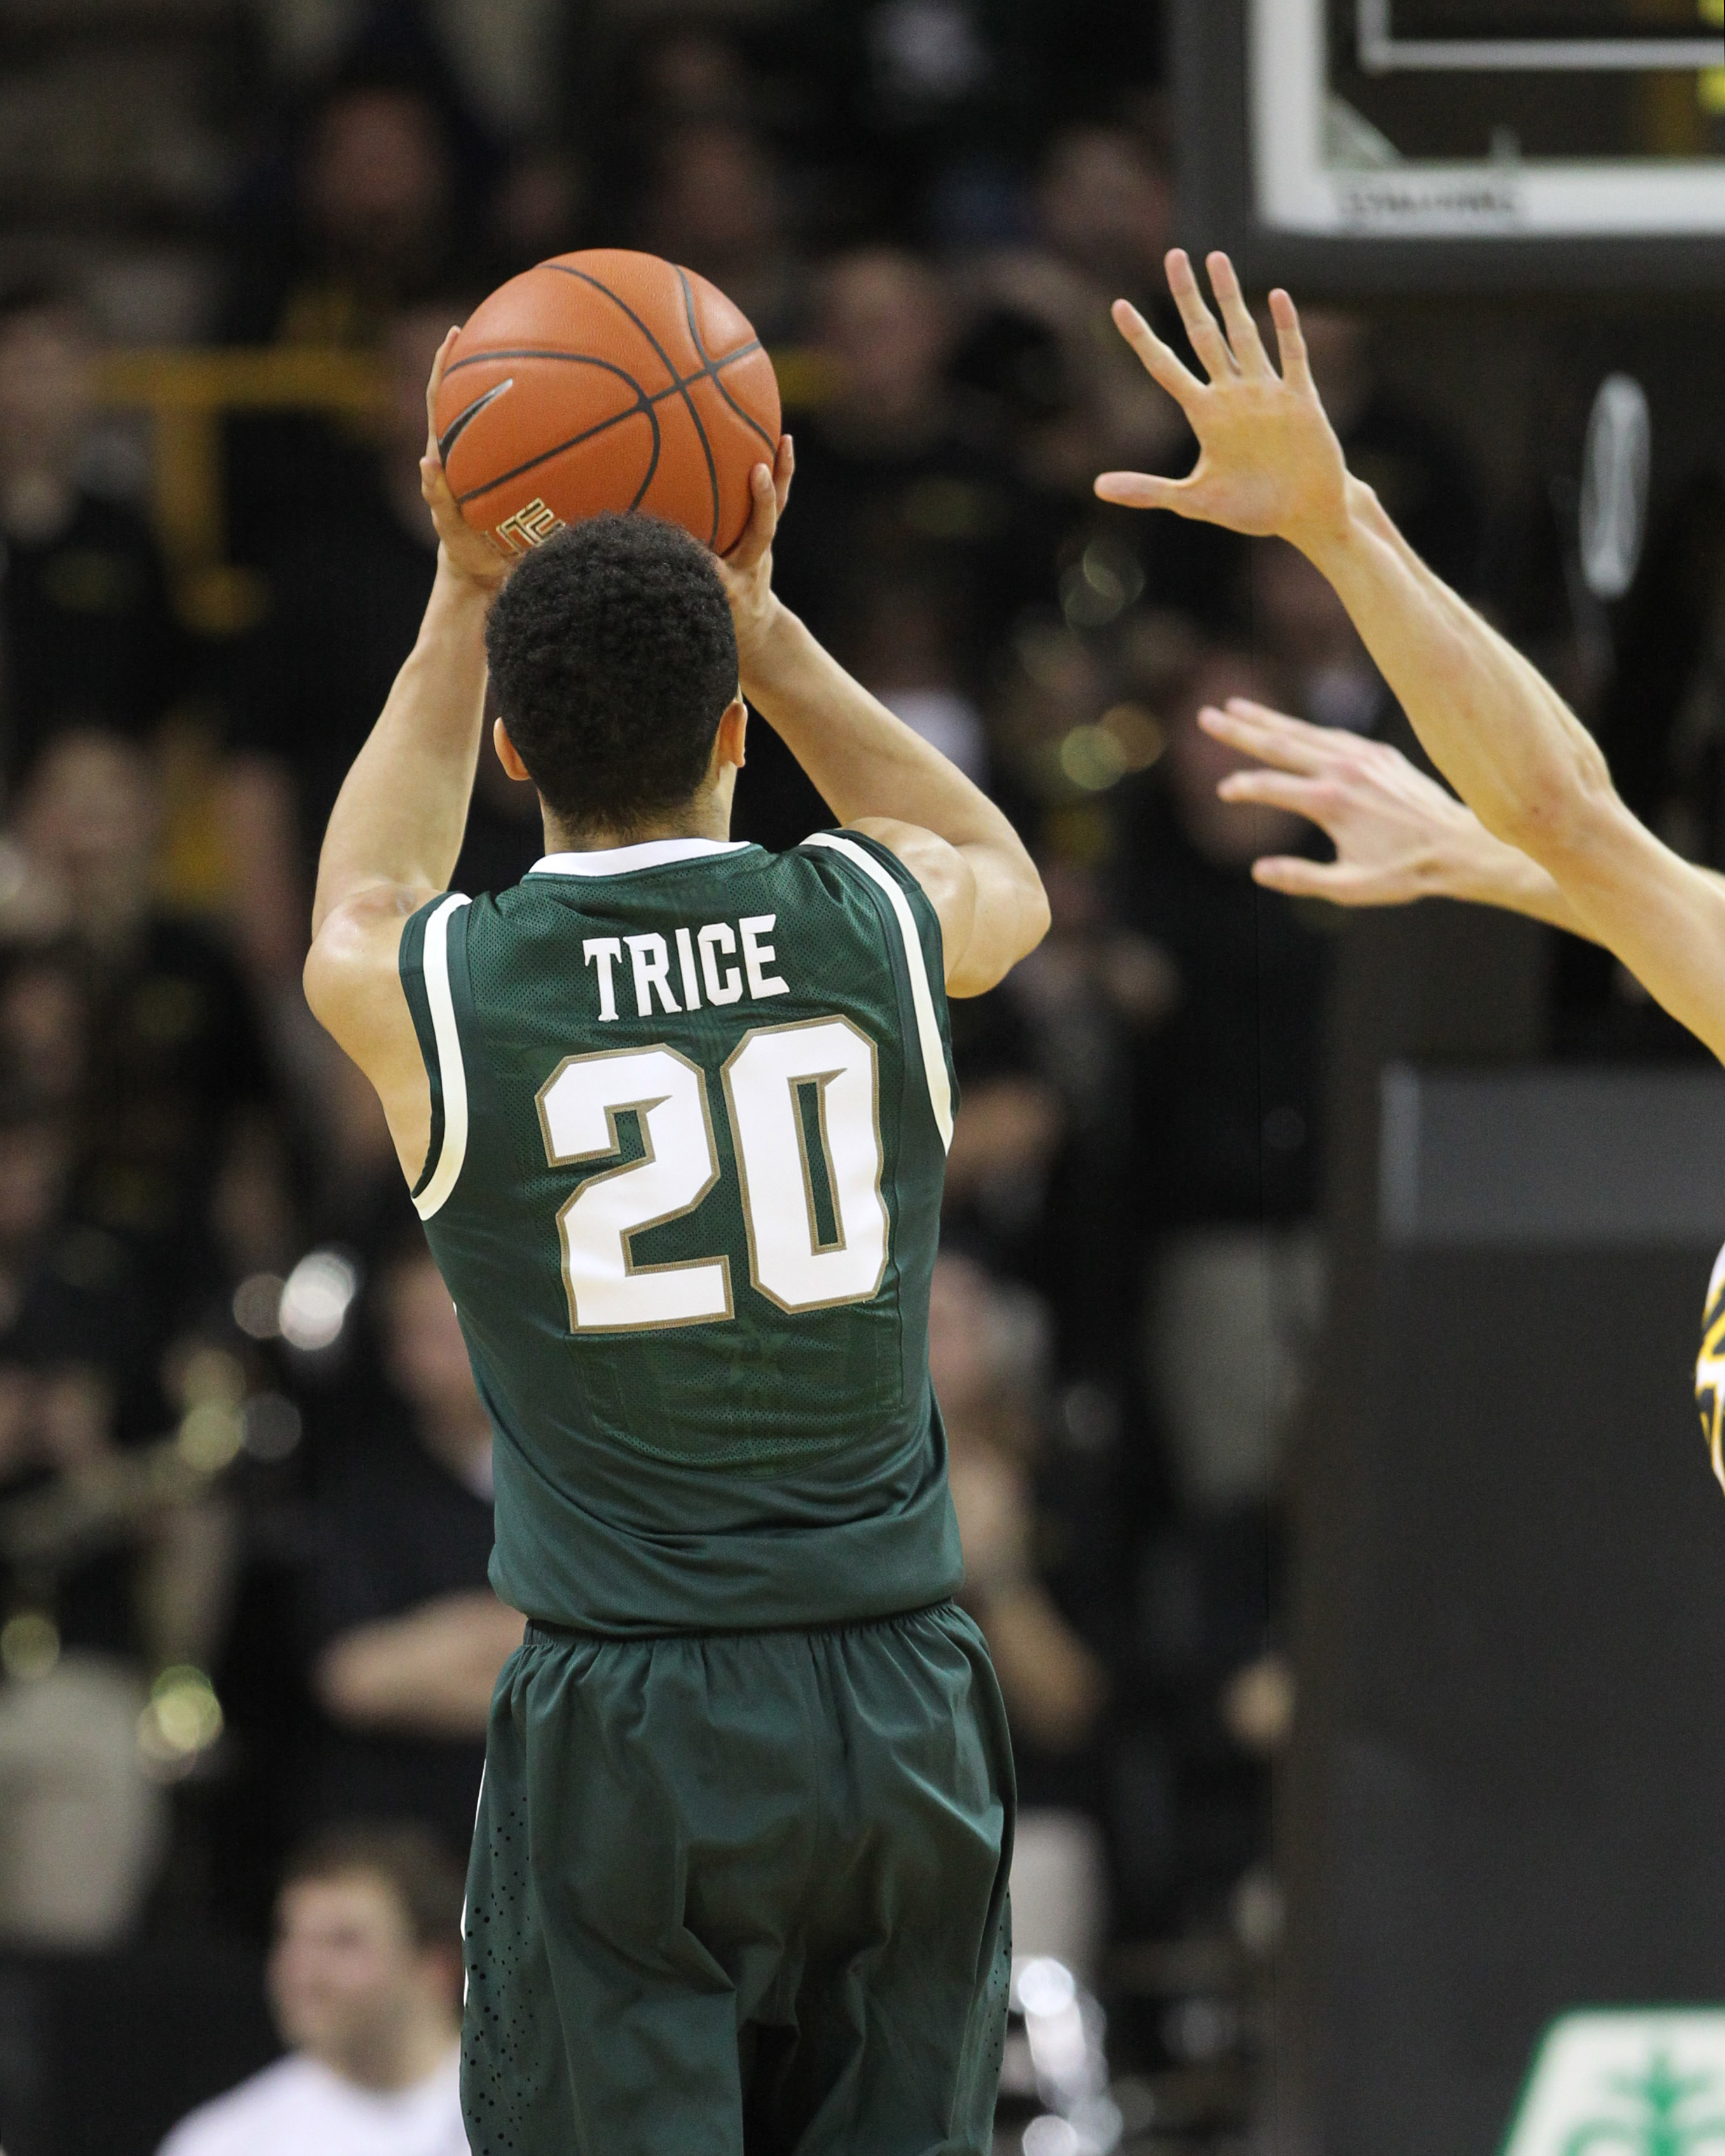 Michigan State's Travis Trice exploded for seven 3-pointers in a big road win over Iowa.